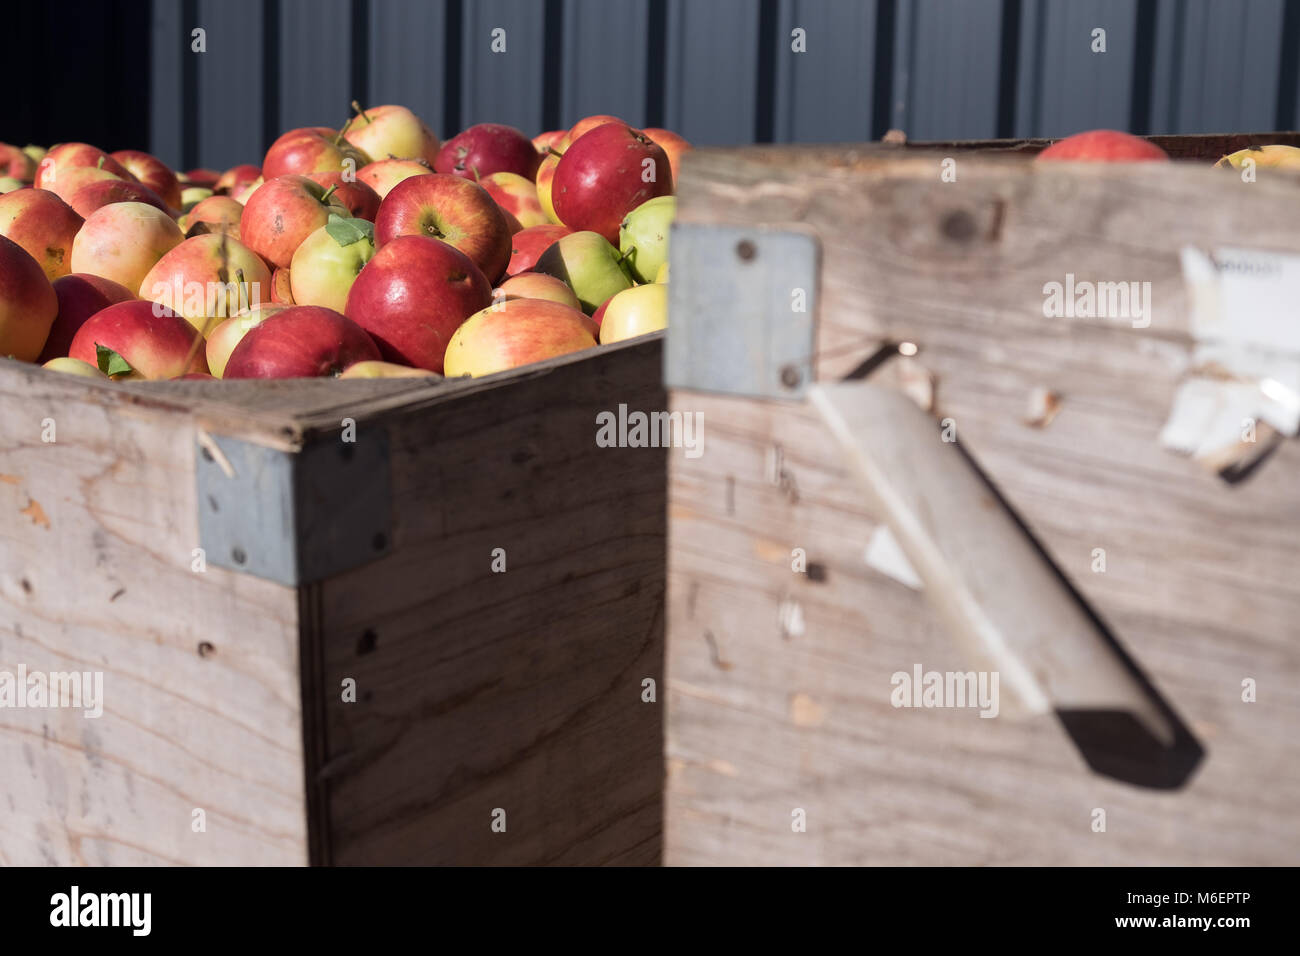 Apples in wooden crates Stock Photo